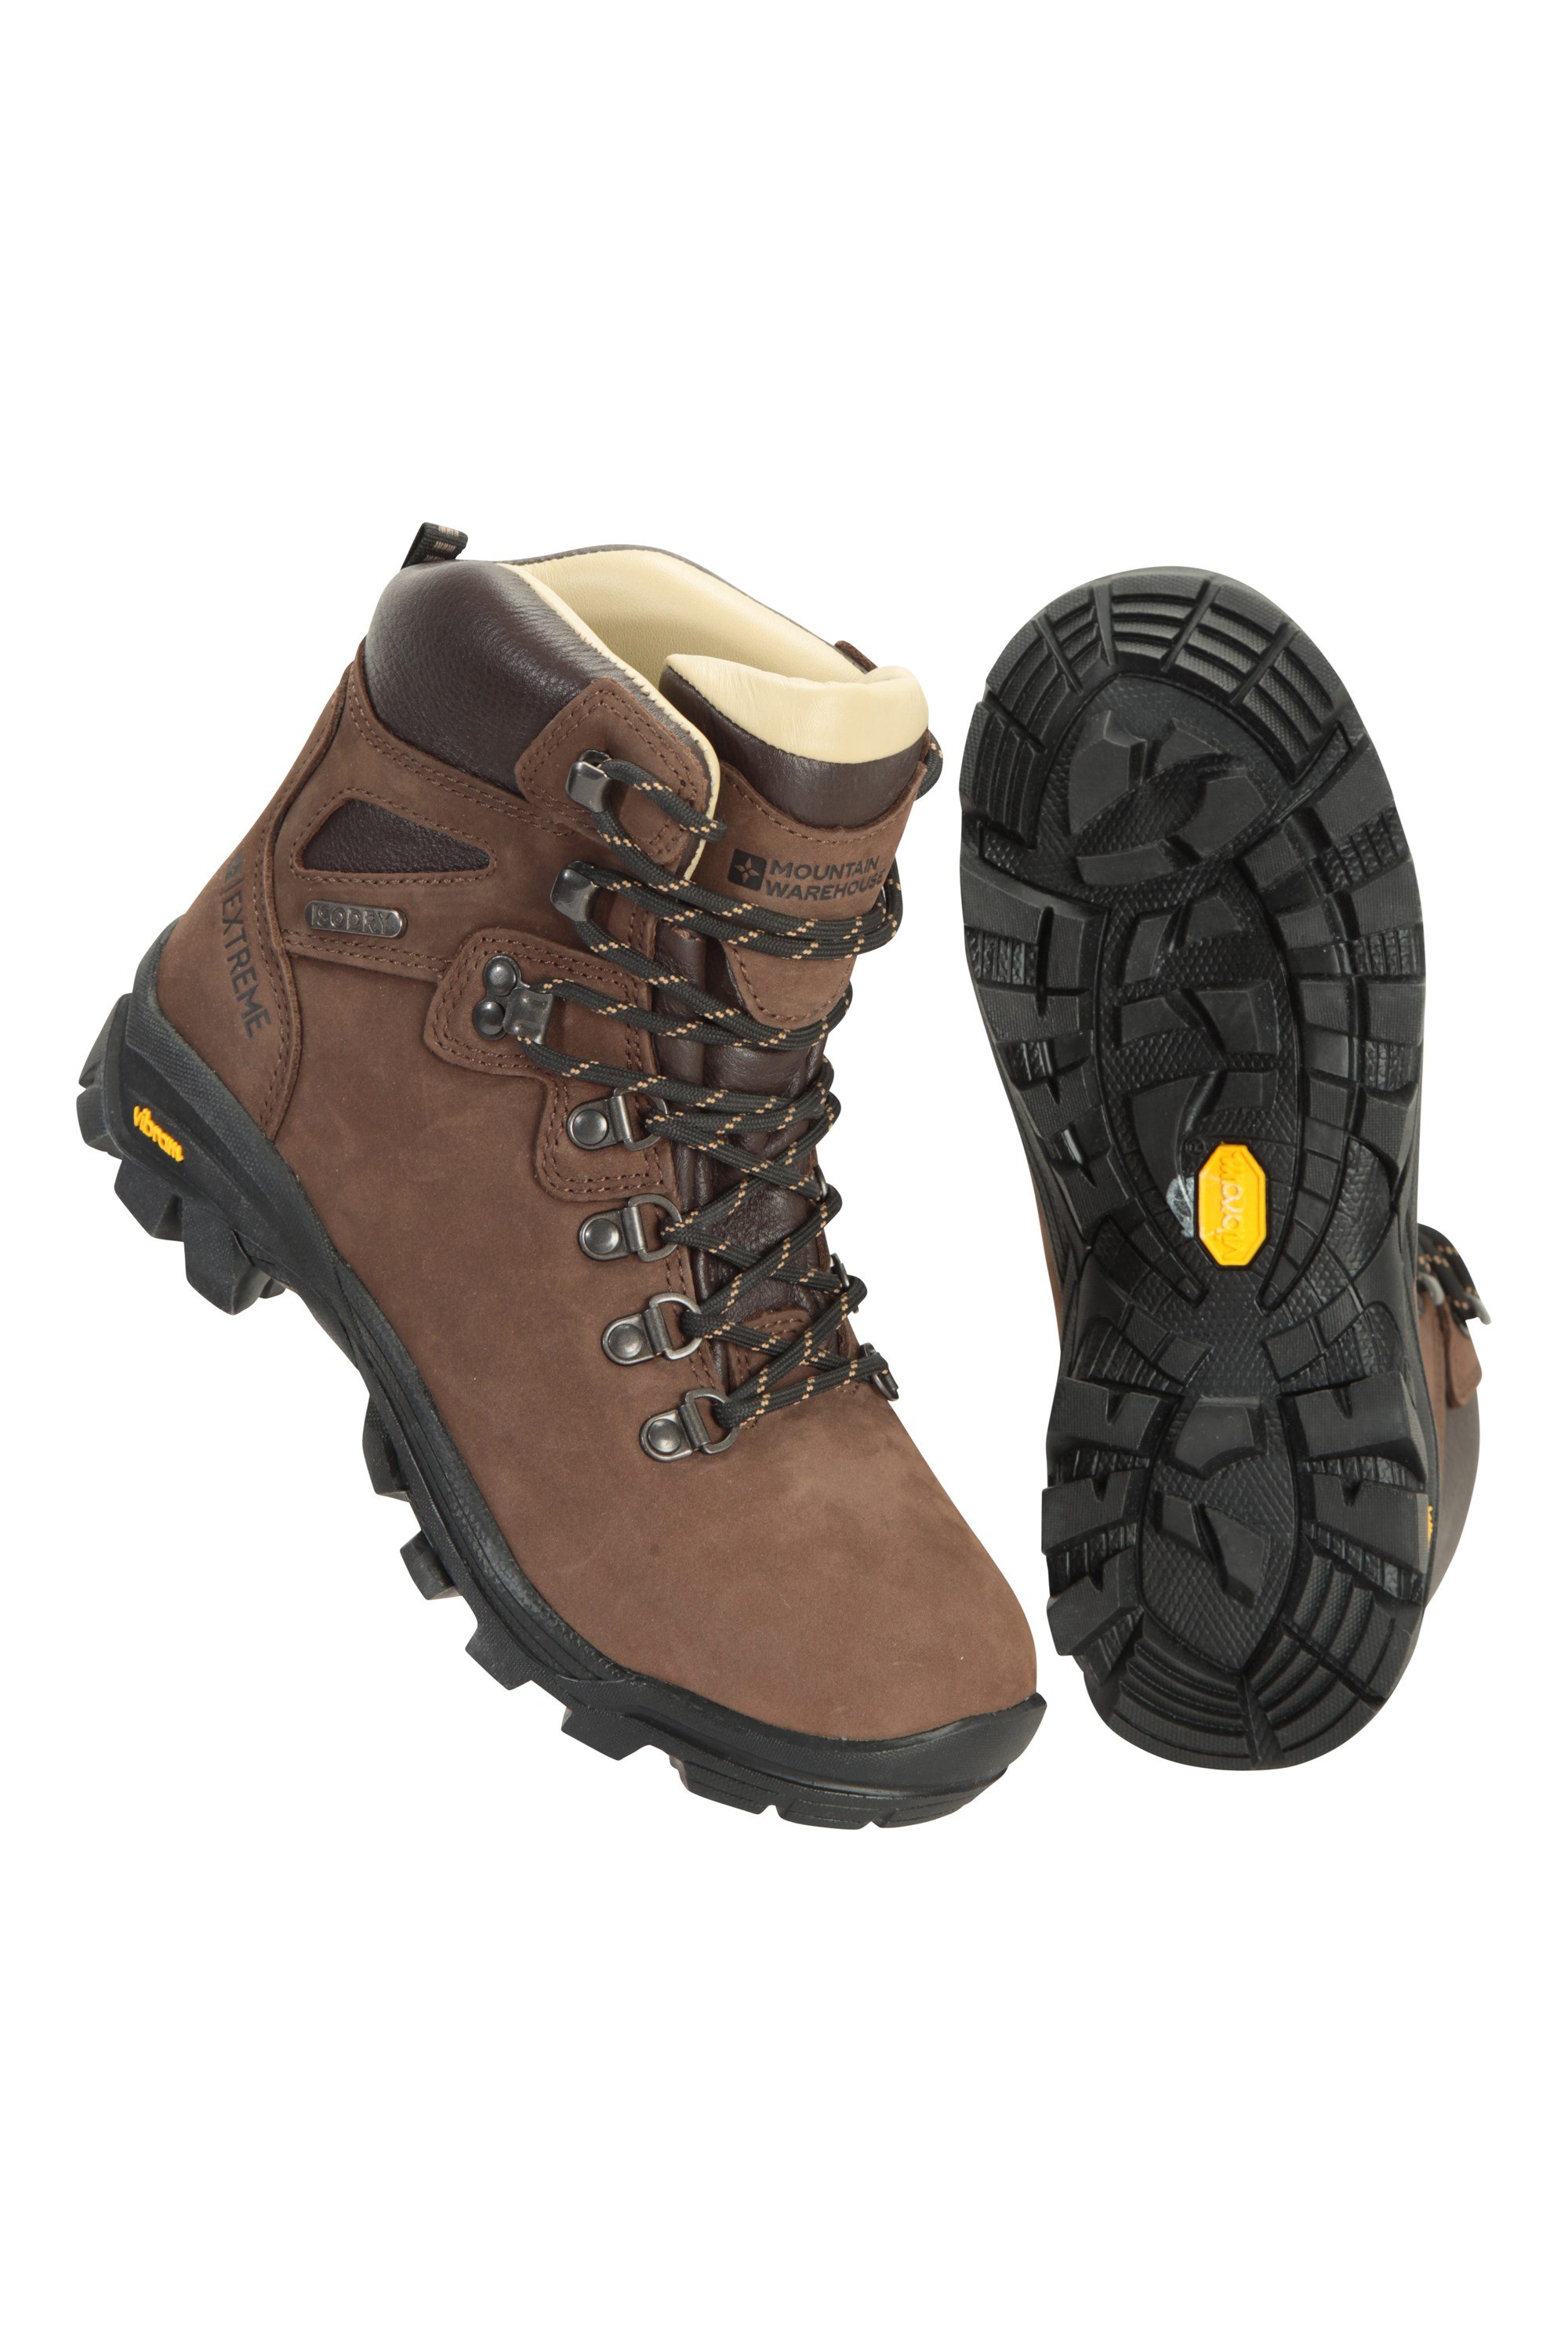 Odyssey Extreme Womens Waterproof Vibram Hiking Boots - Brown